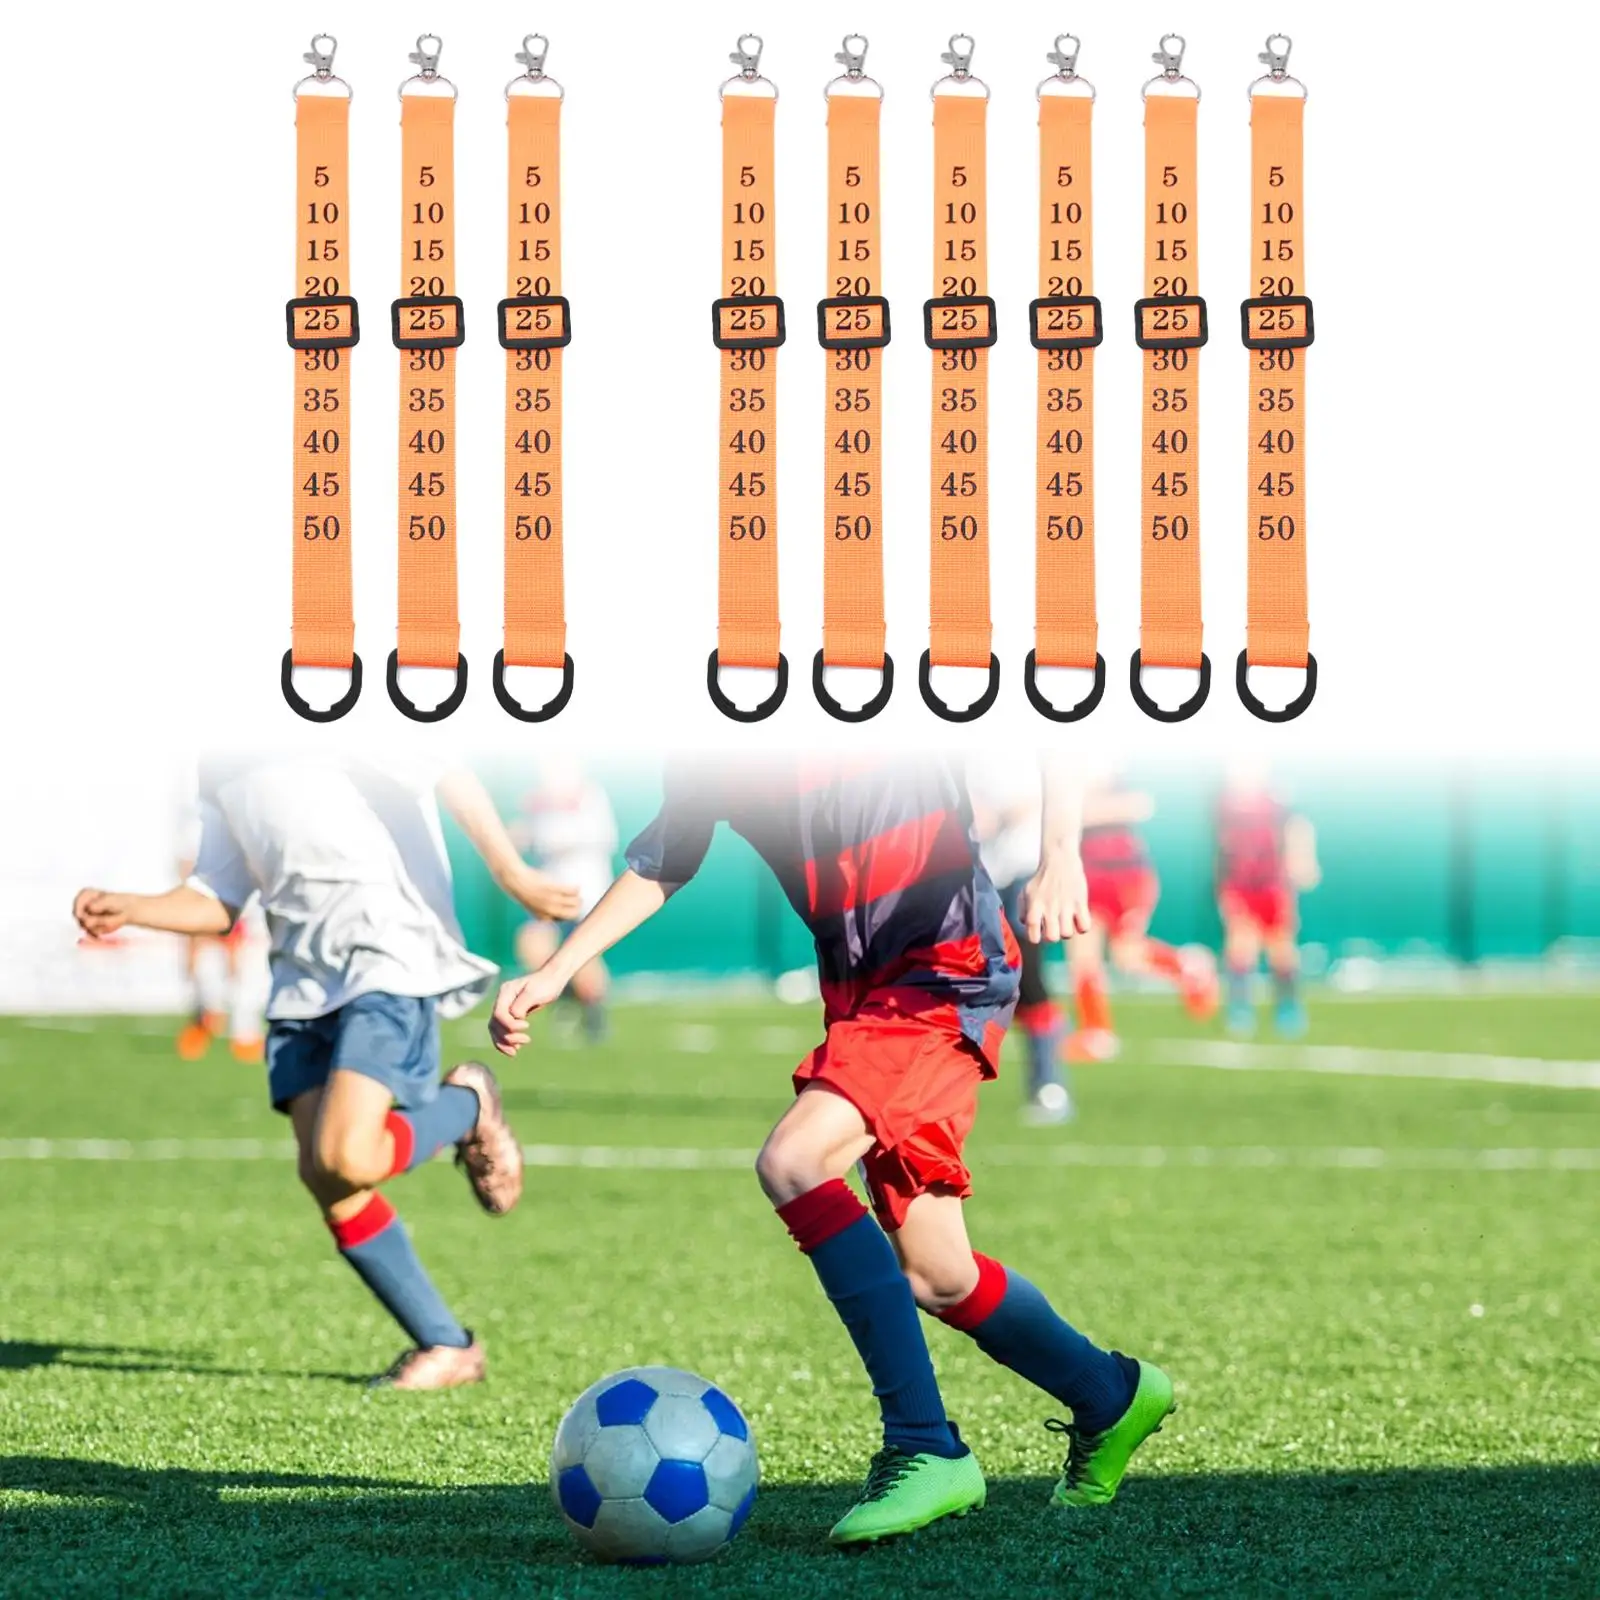 Football Chain Clip Football Referee Chain Clips Football Yard Markers Wristband for Daily Training